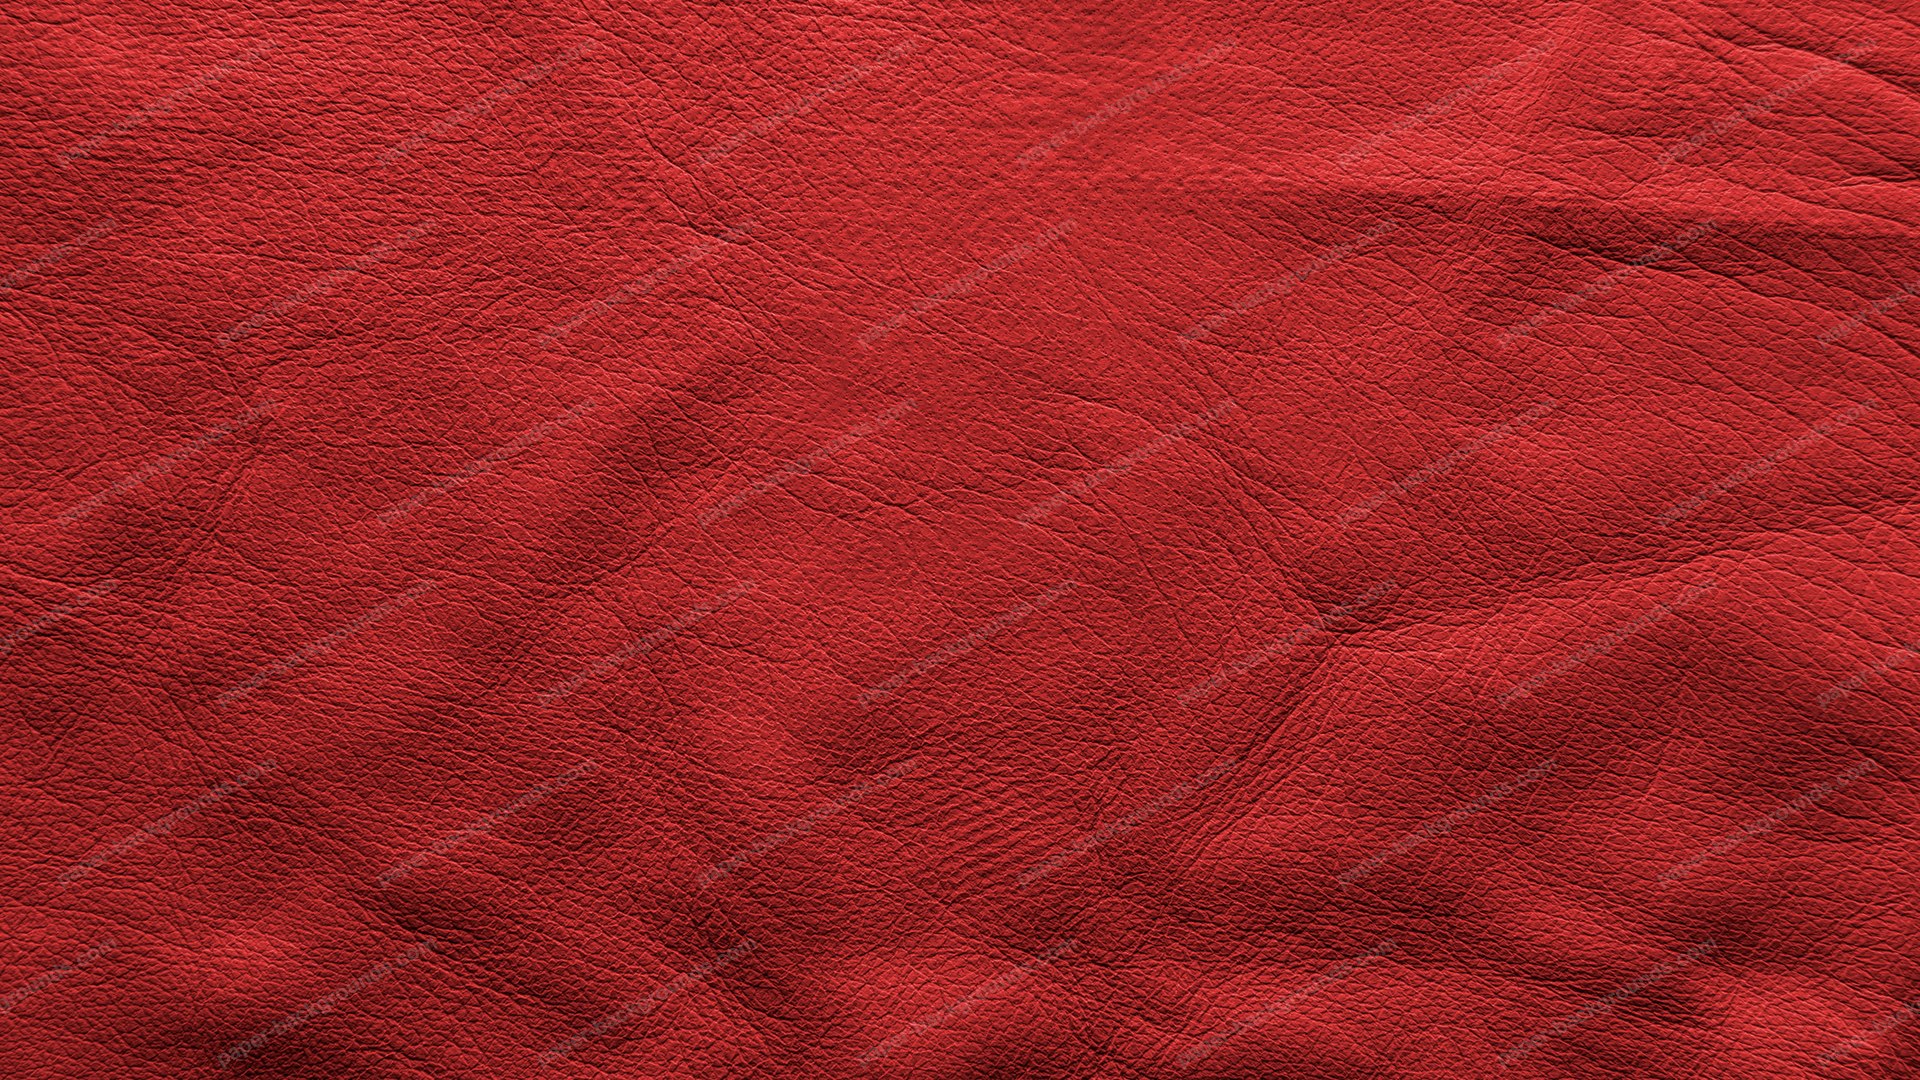 Red Vintage Soft Leather Background HD X 1080p